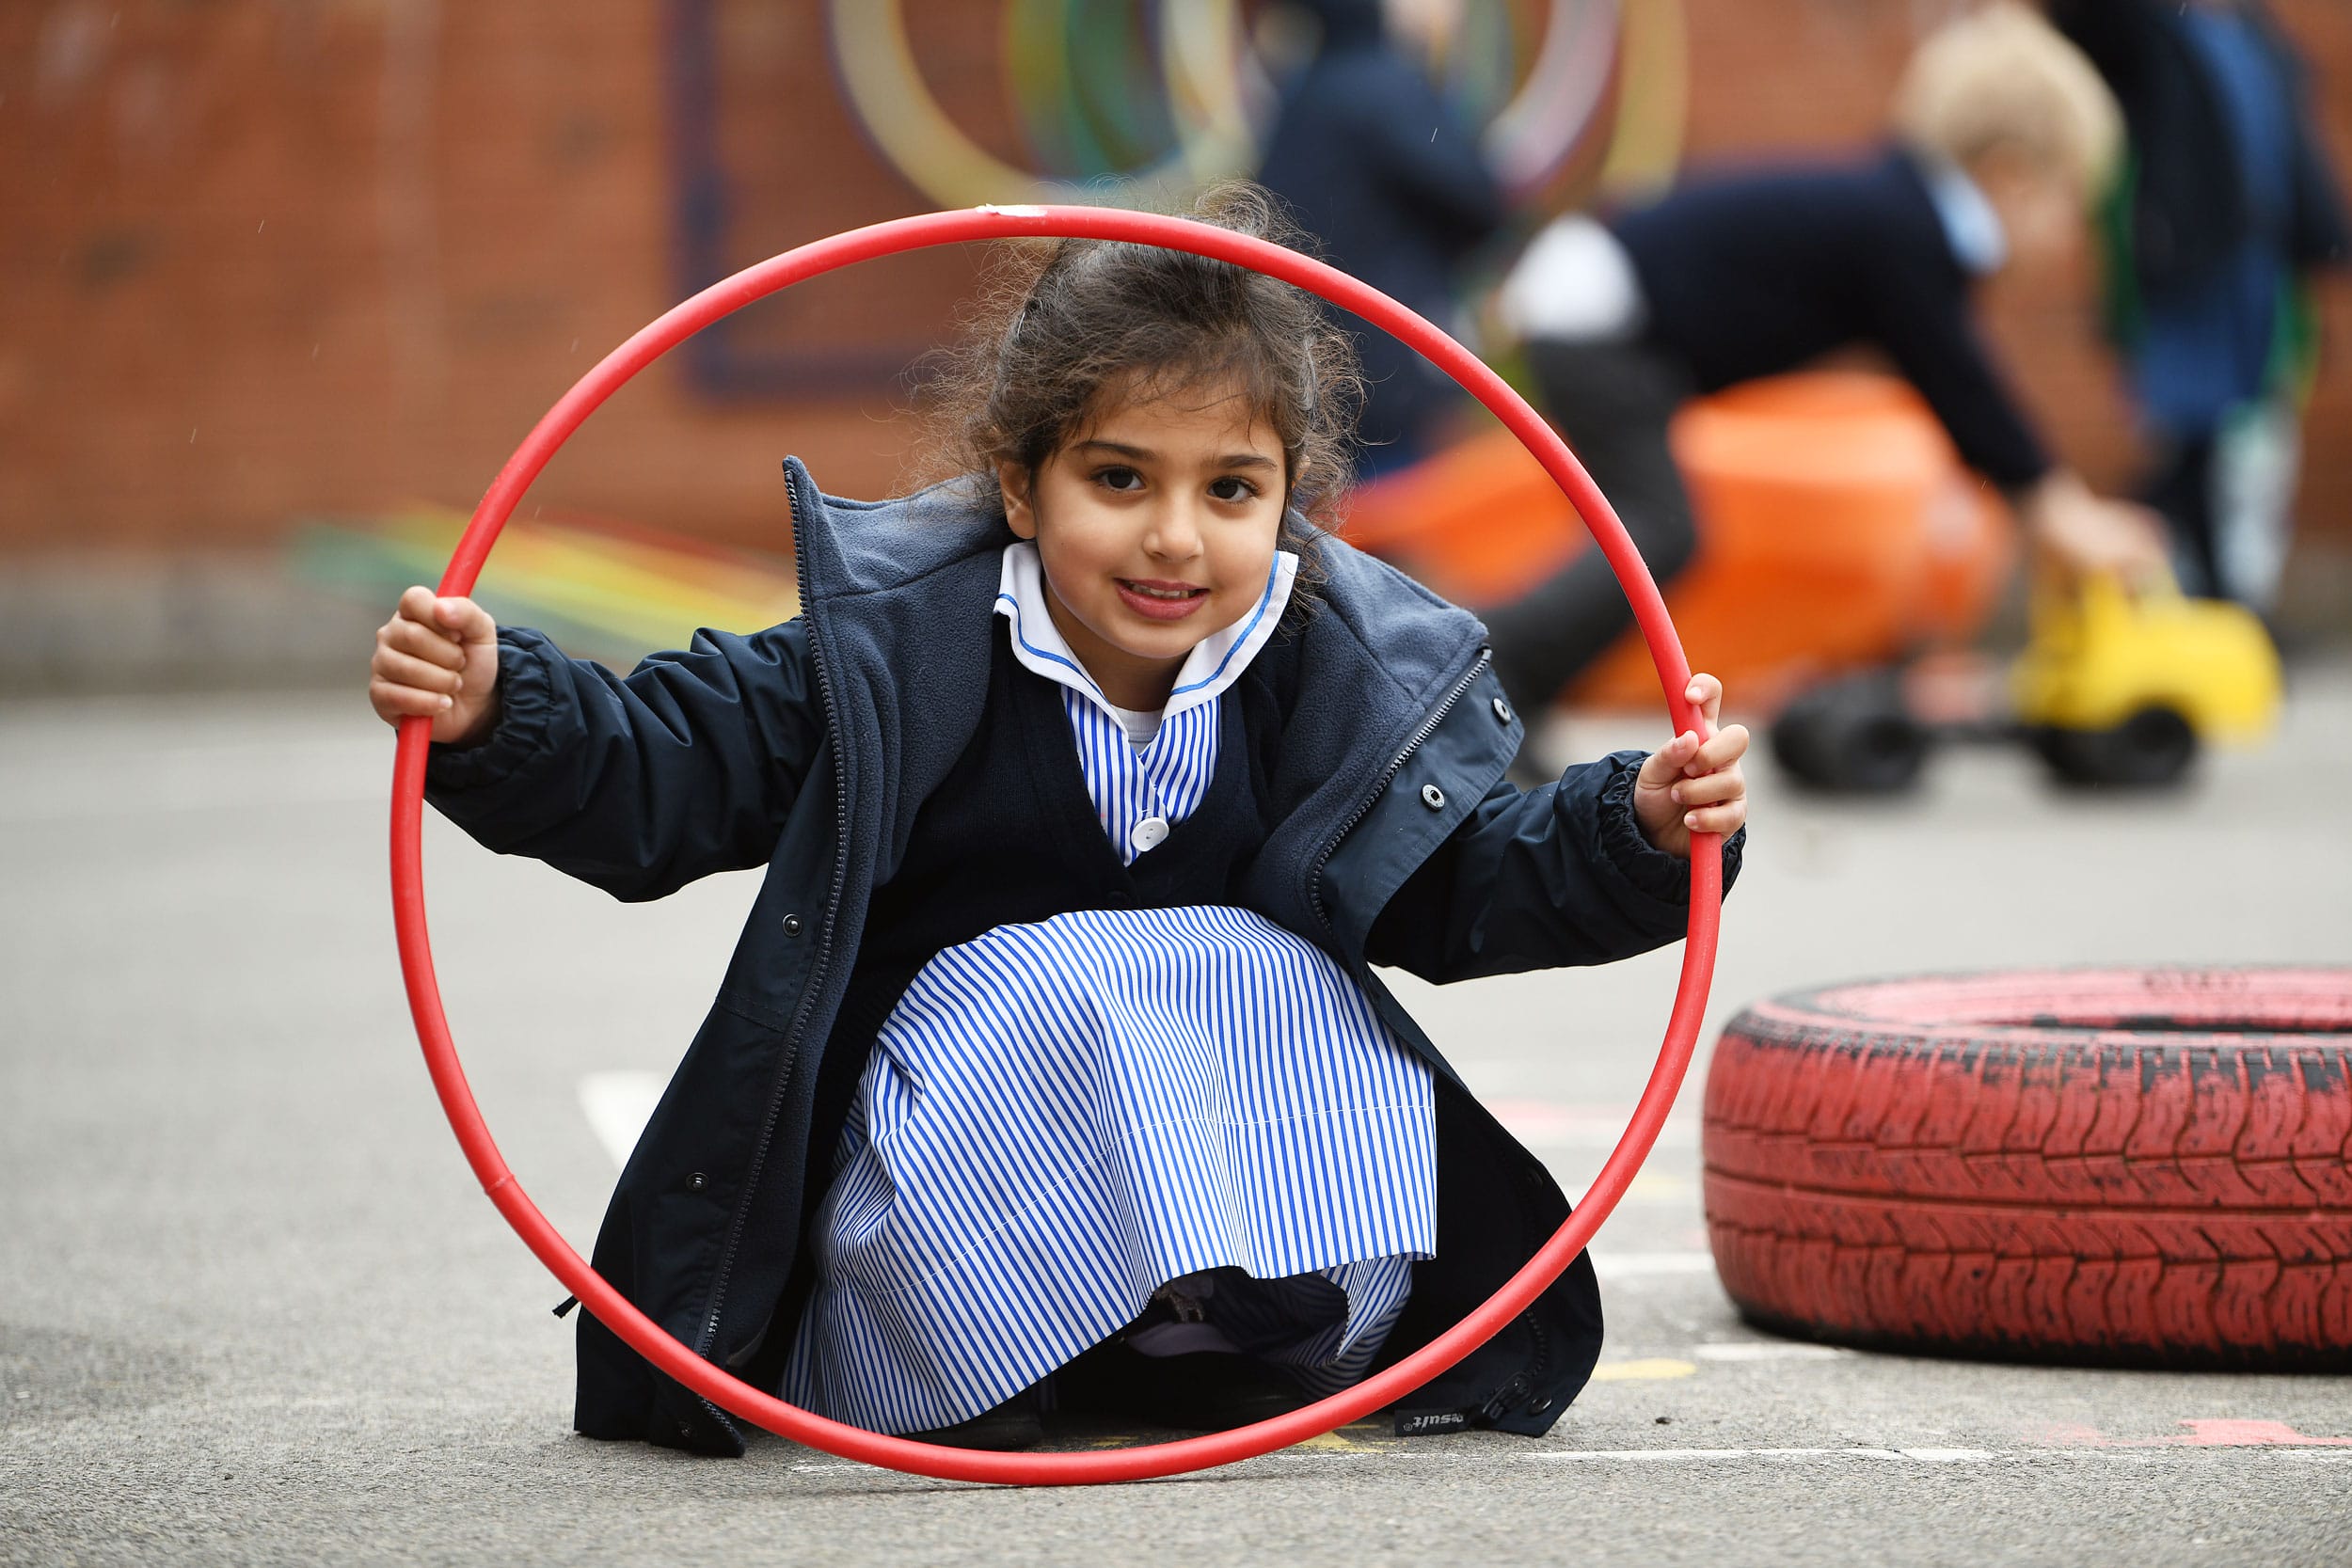 A Nursery girl crouched down and looking through a hula hoop on the playground.